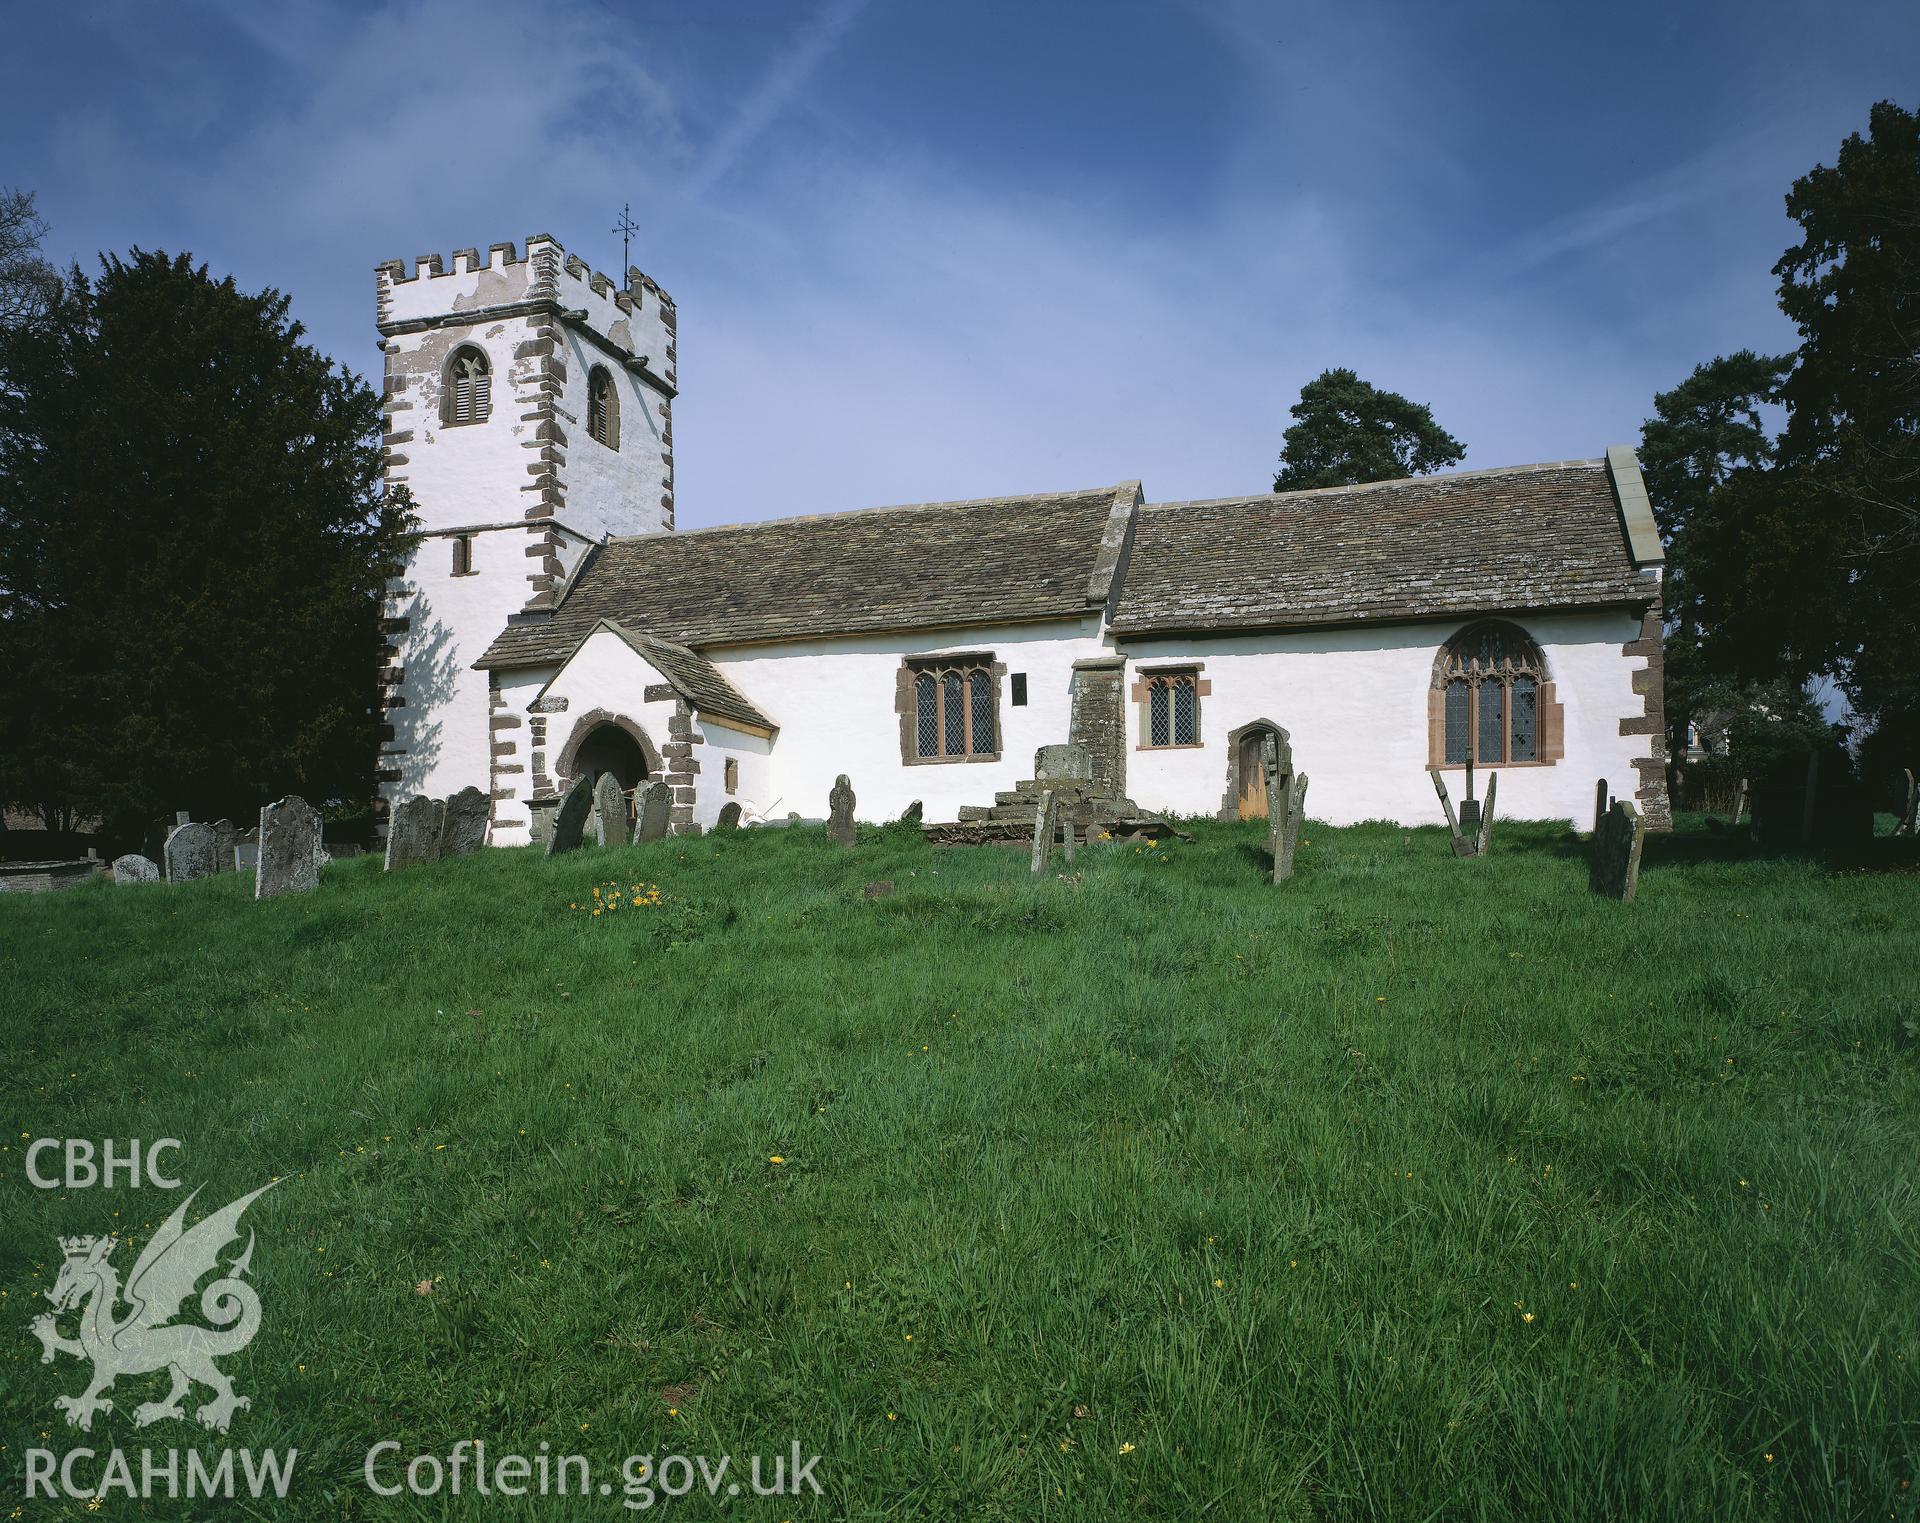 RCAHMW colour transparency showing exterior view of St Cadoc's Church, Llangattock Lingoed.